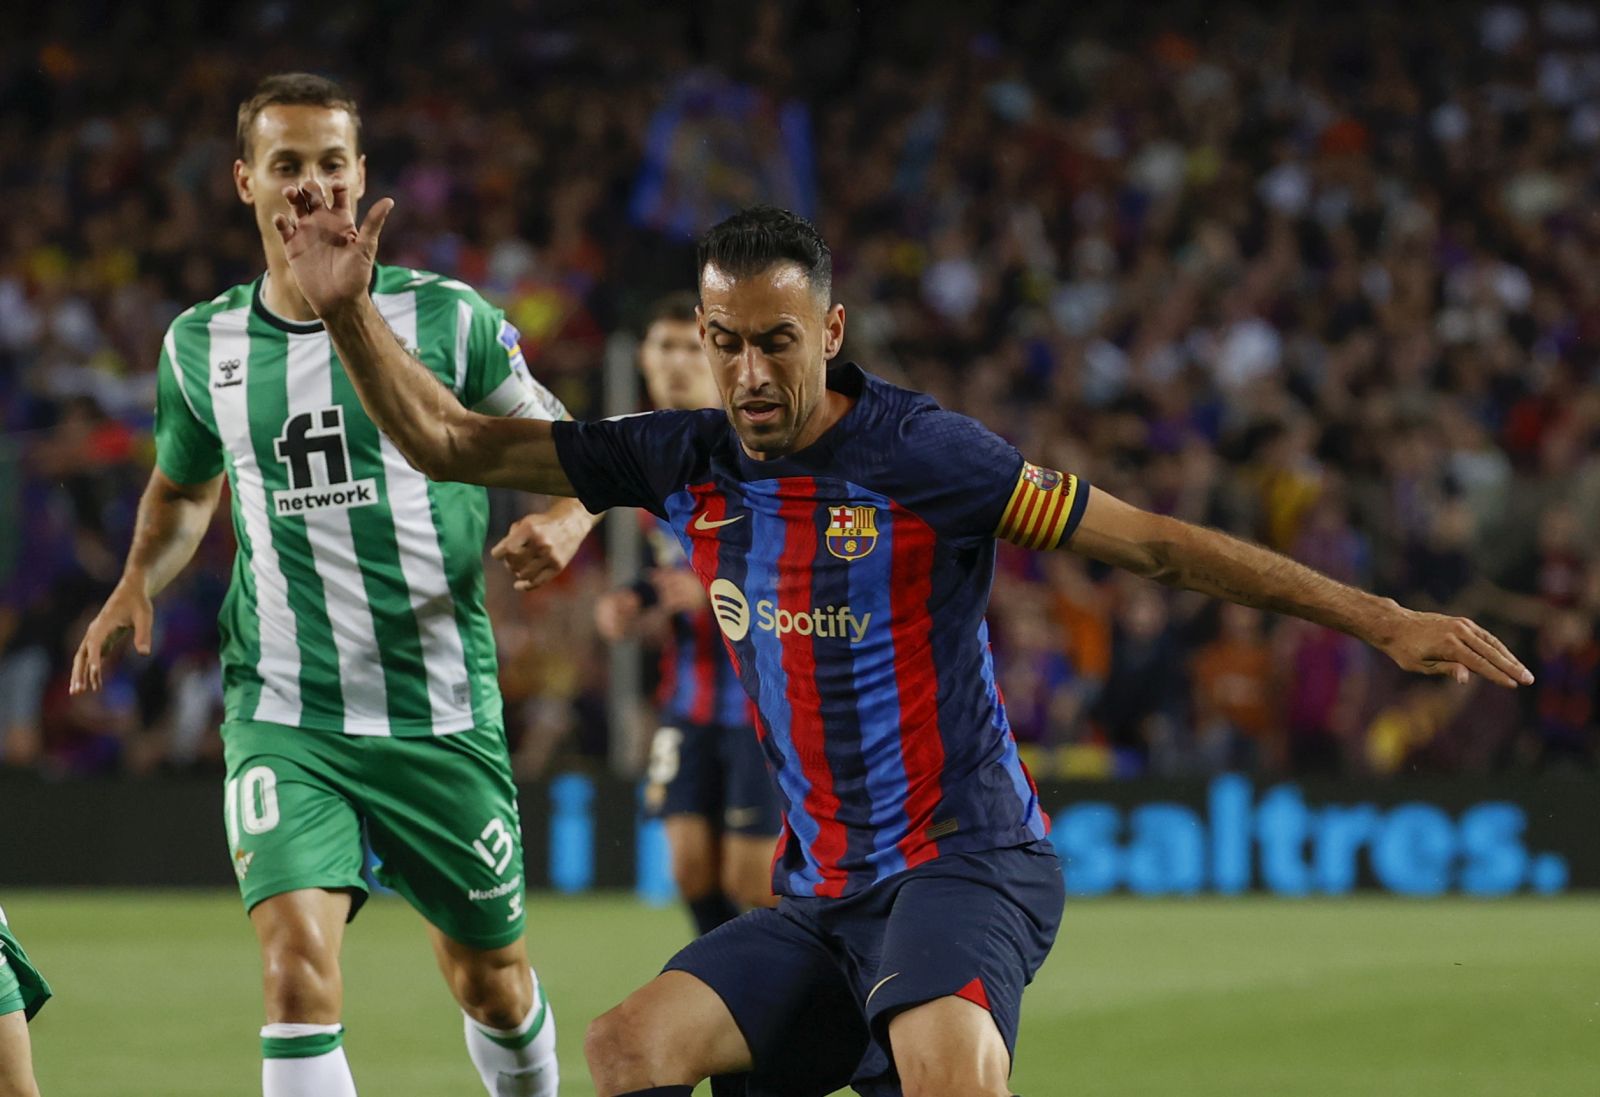 epa10599018 FC Barcelona's Sergio Busquets (R) in action against Real Betis' Guido Rodriguez (L) during a Spanish LaLiga soccer match between FC Barcelona and Real Betis at Spotify Camp Nou stadium in Barcelona, Spain, 29 April 2023.  EPA/Toni Albir